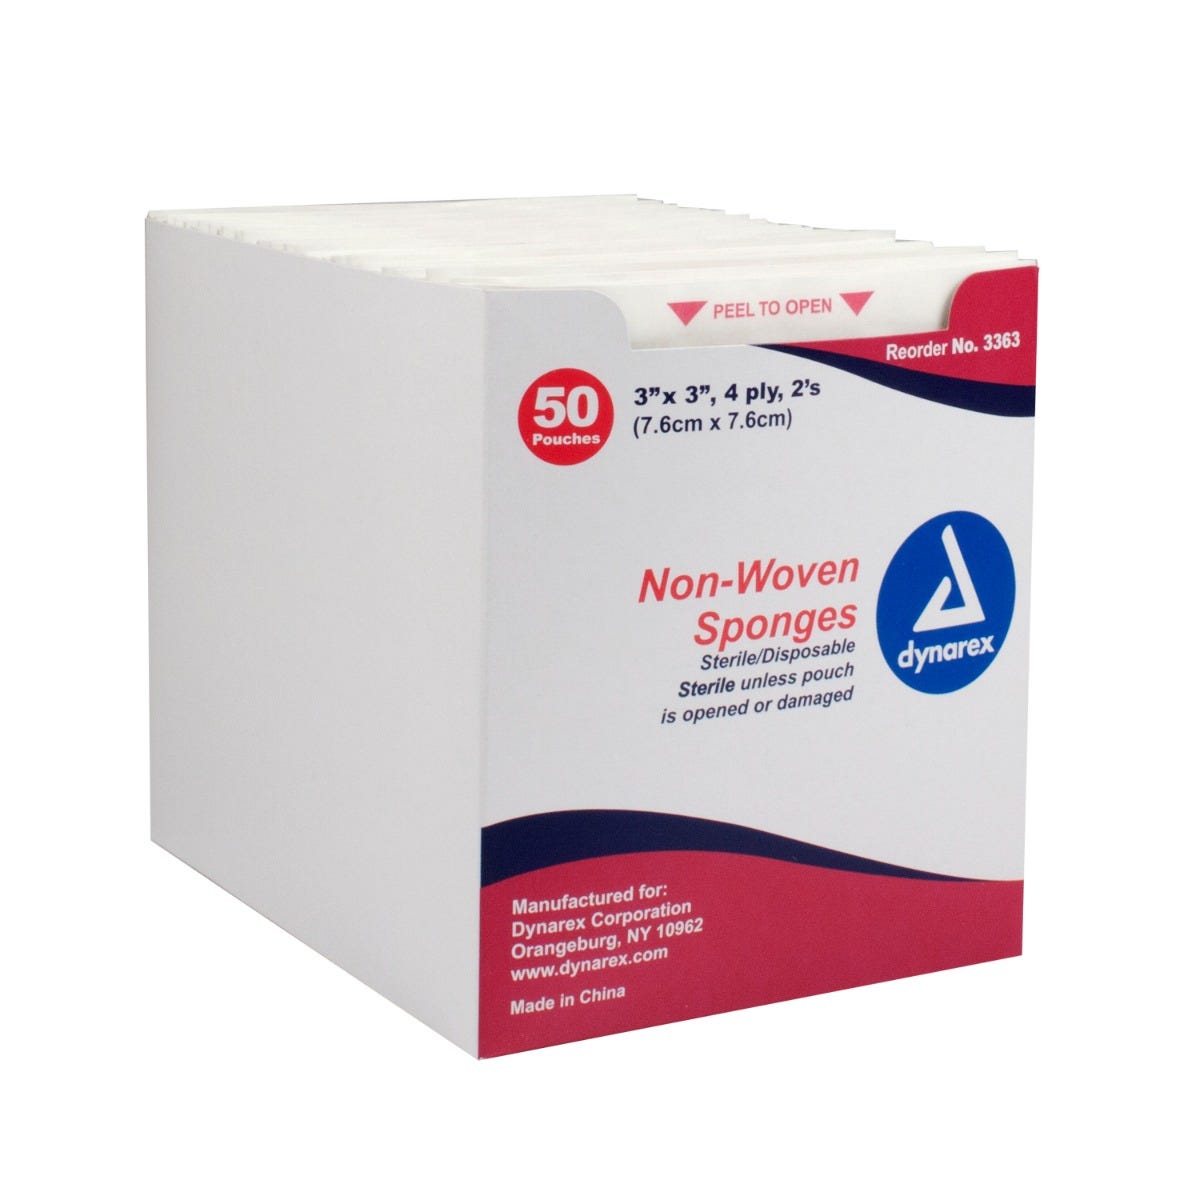 Nonwoven General Use Sponges, Sterile - 3" x 3", 4-ply, 2's, 2400/Case